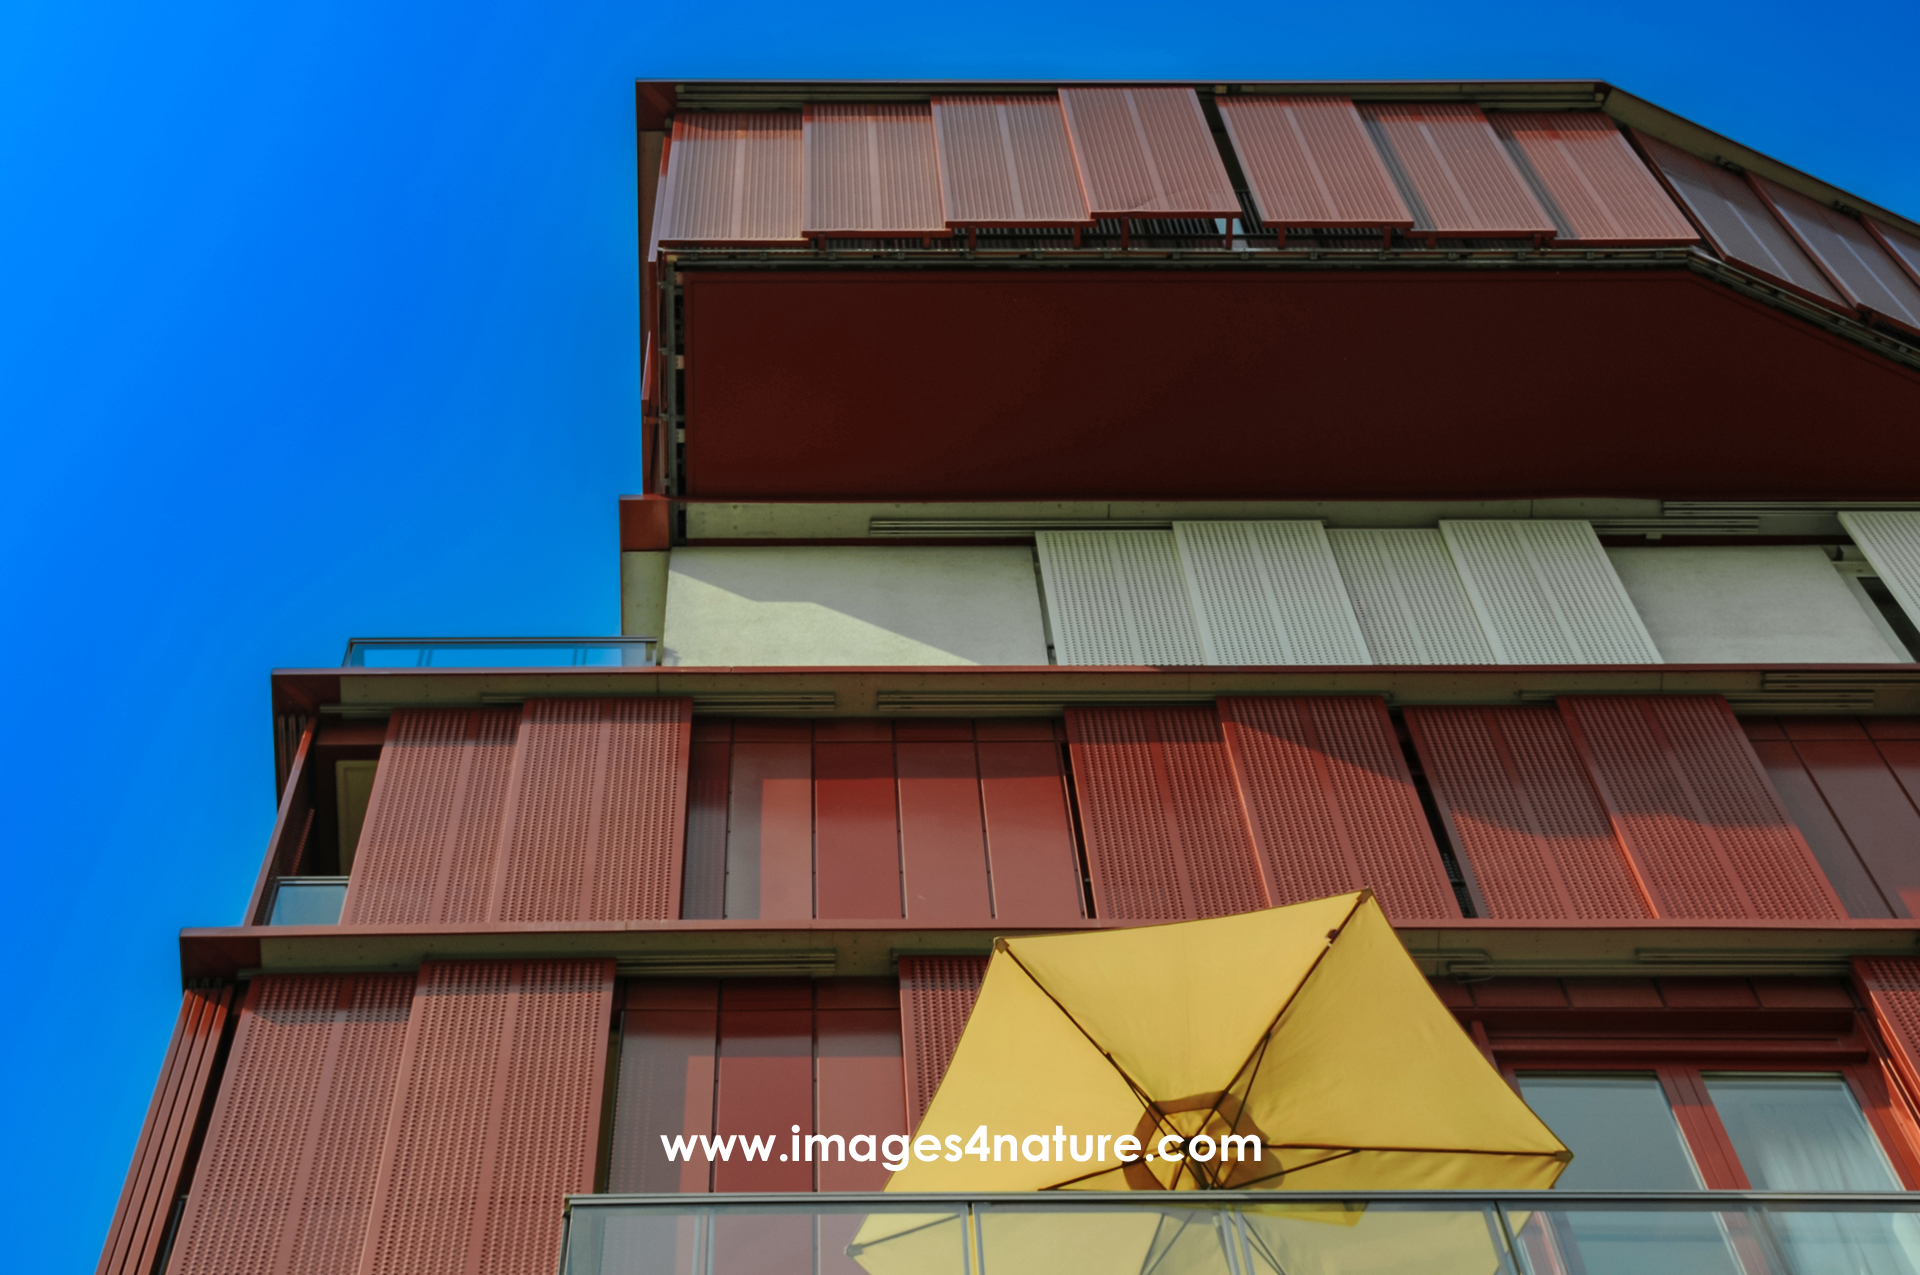 Low angle view of modern residential building with yellow sunshade